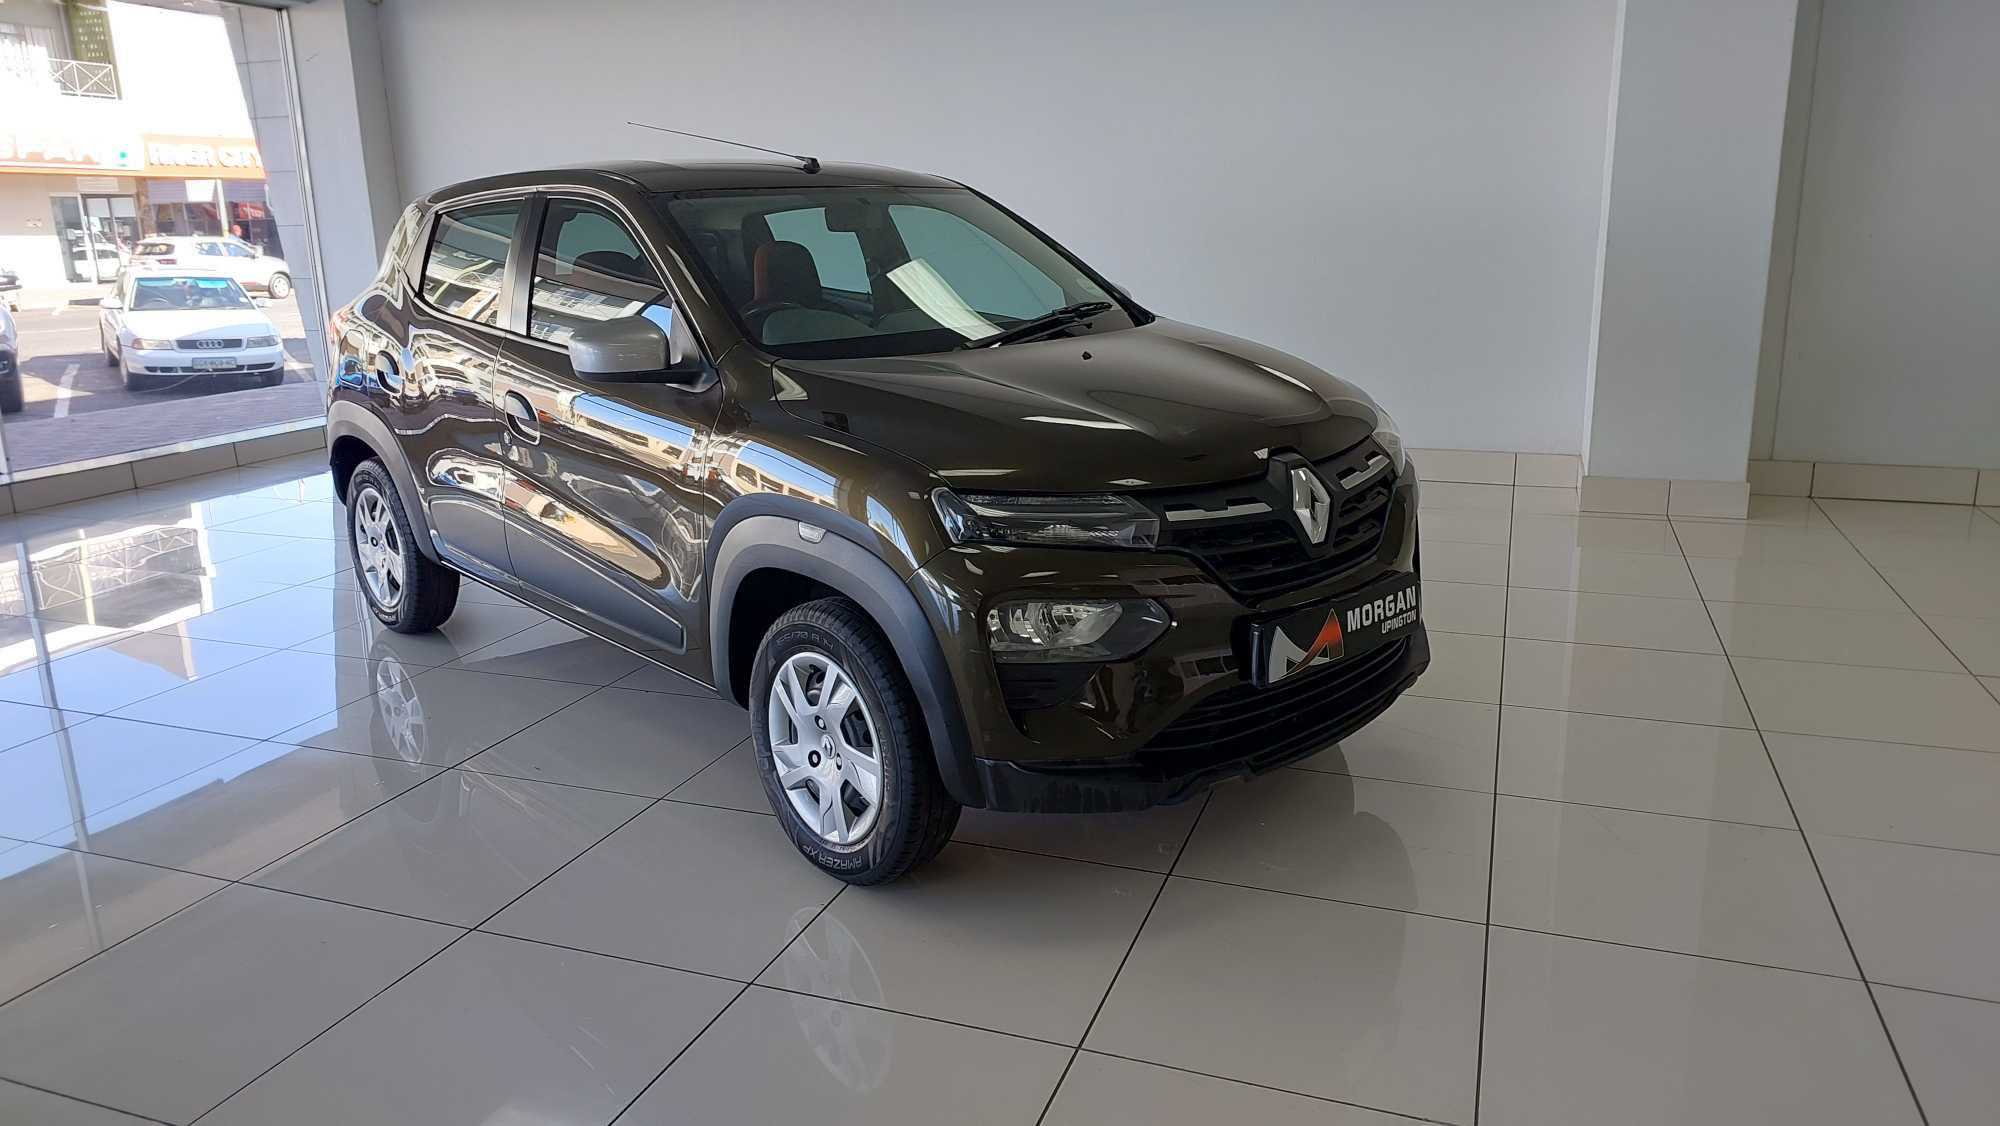 Renault kwid for Sale in South Africa